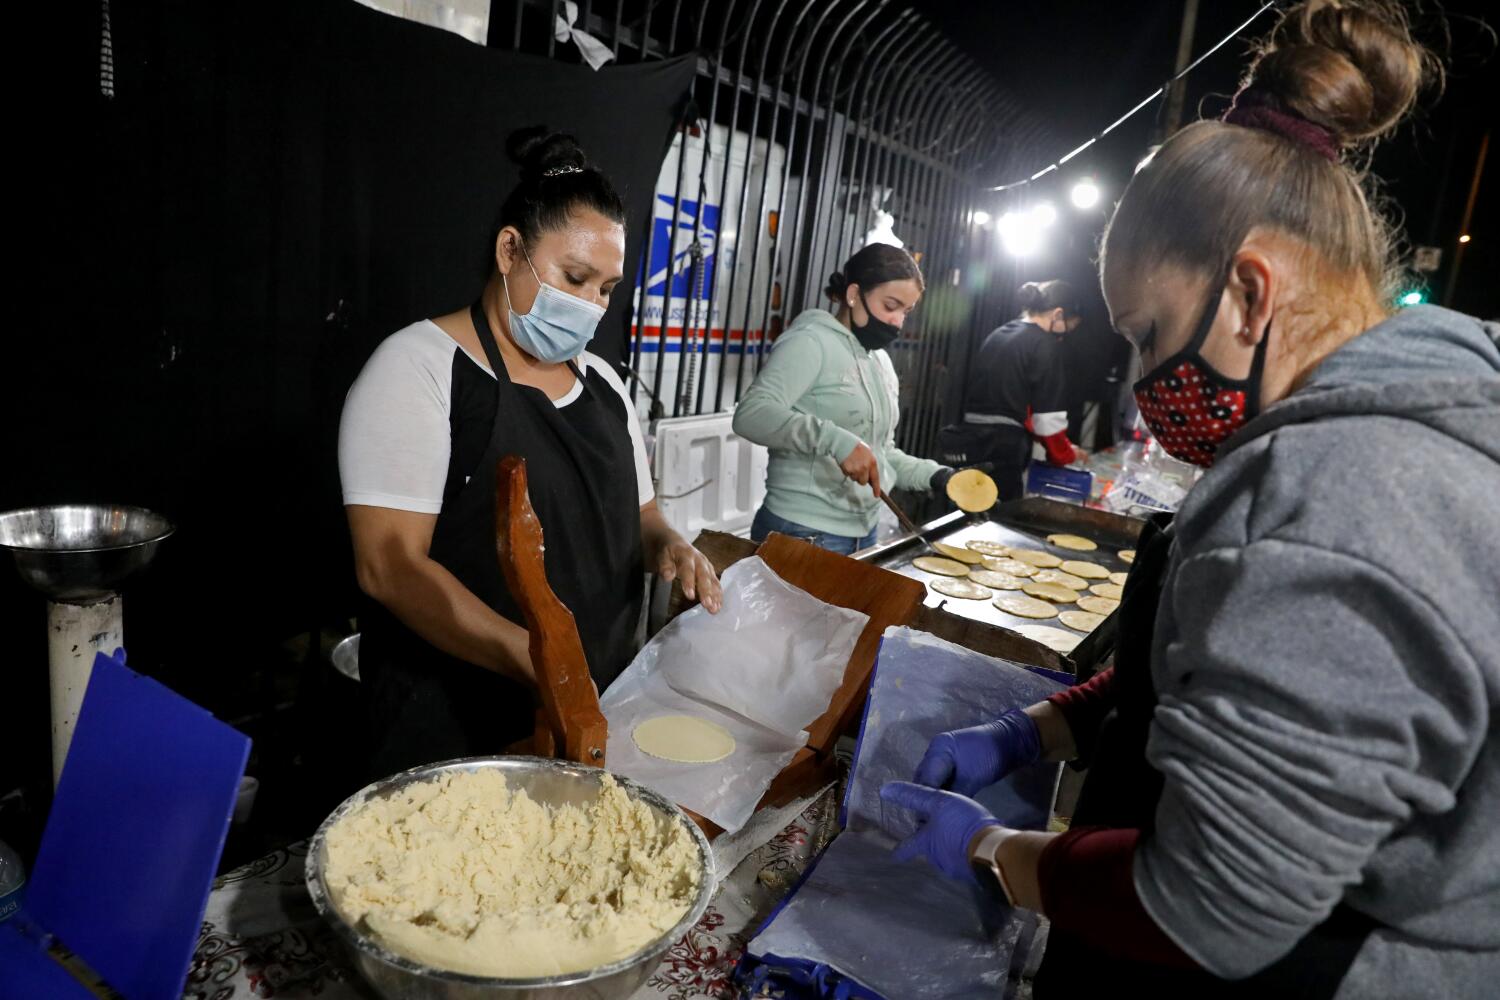 Column: 130 years ago, a Los Angeles tamale vendor was robbed. How times haven't changed